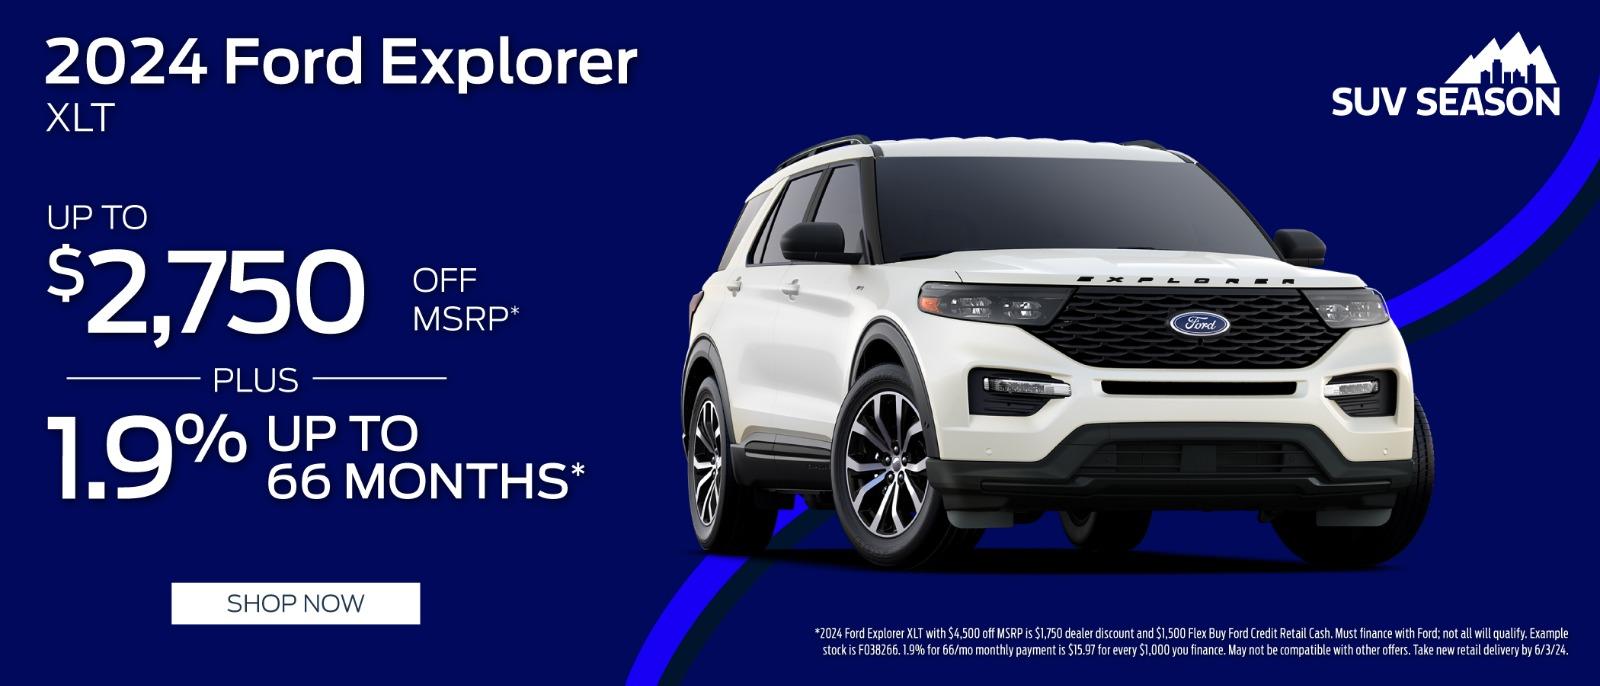 2024 Ford Explorer $2,750 Off MSRP plus up to 1.9% for 66 months